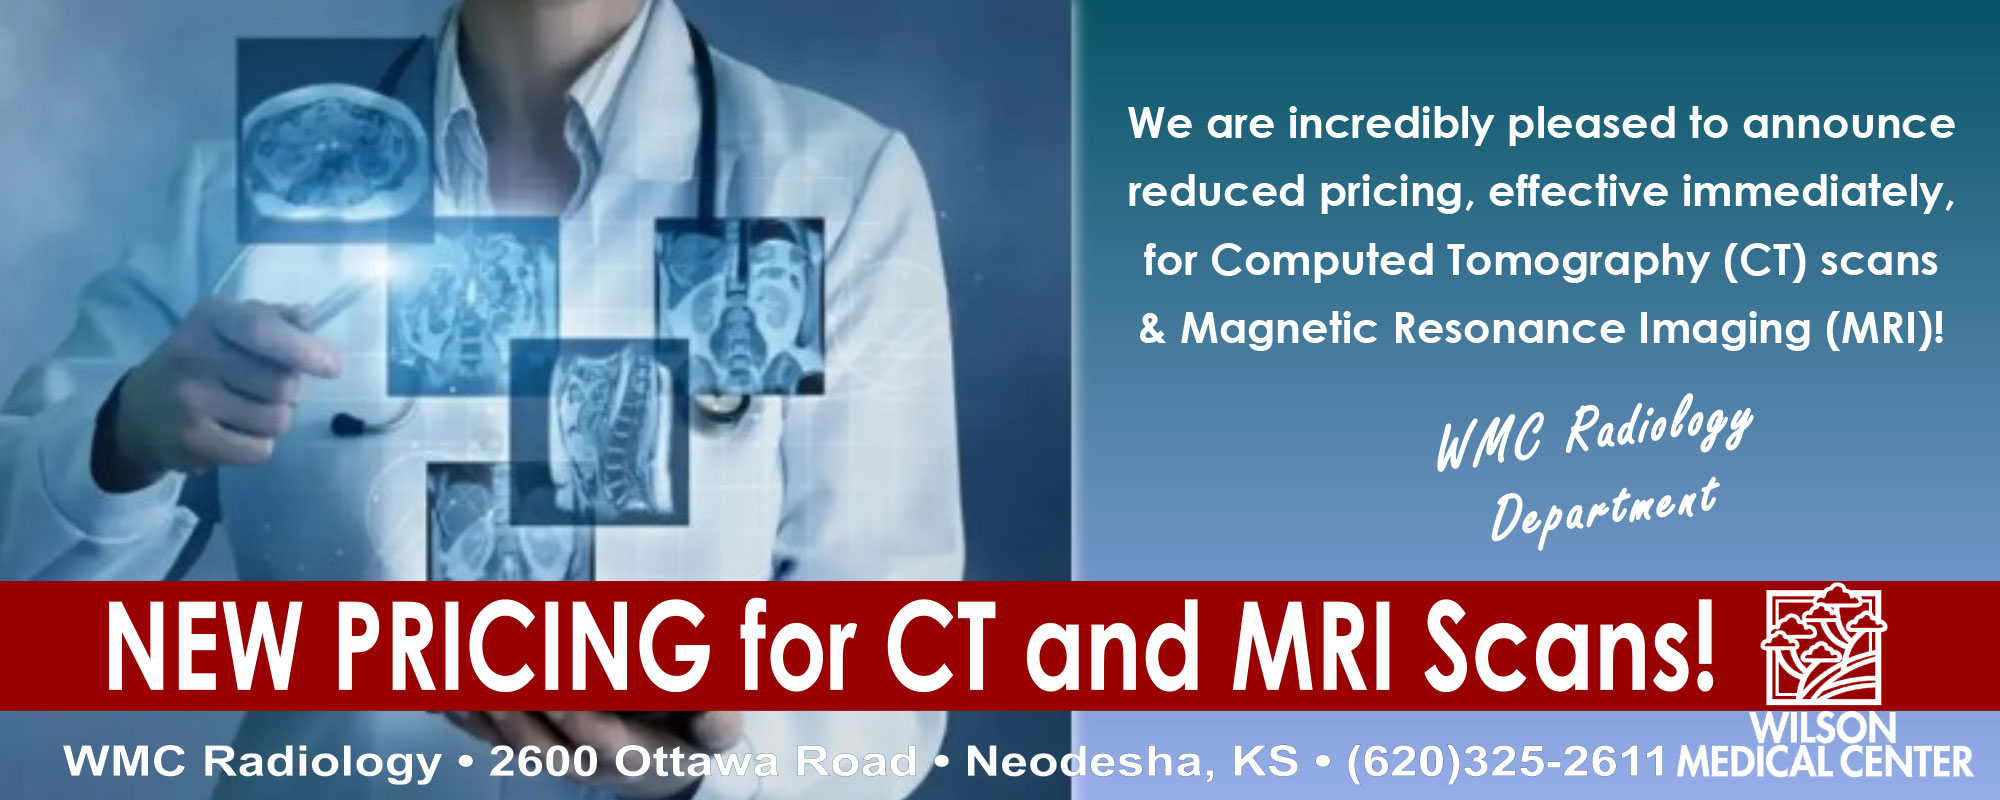 Banner picture of a female Physician  holding a light in front of some digital image icons of X-rays in different areas of the body. Banner says:

We are incredibly pleased to announce reduced pricing, effective immediately, for Computed Tomography (CT) scans & Magnetic Resonance Imaging (MRI) !
WMC Radiology Department

NEW PRICING for CT and MRI Scans!
-WMC Radiology 
* 2600 Ottawa Road * Neodesha, KS * (620)325-2611
Wilson Medical Center